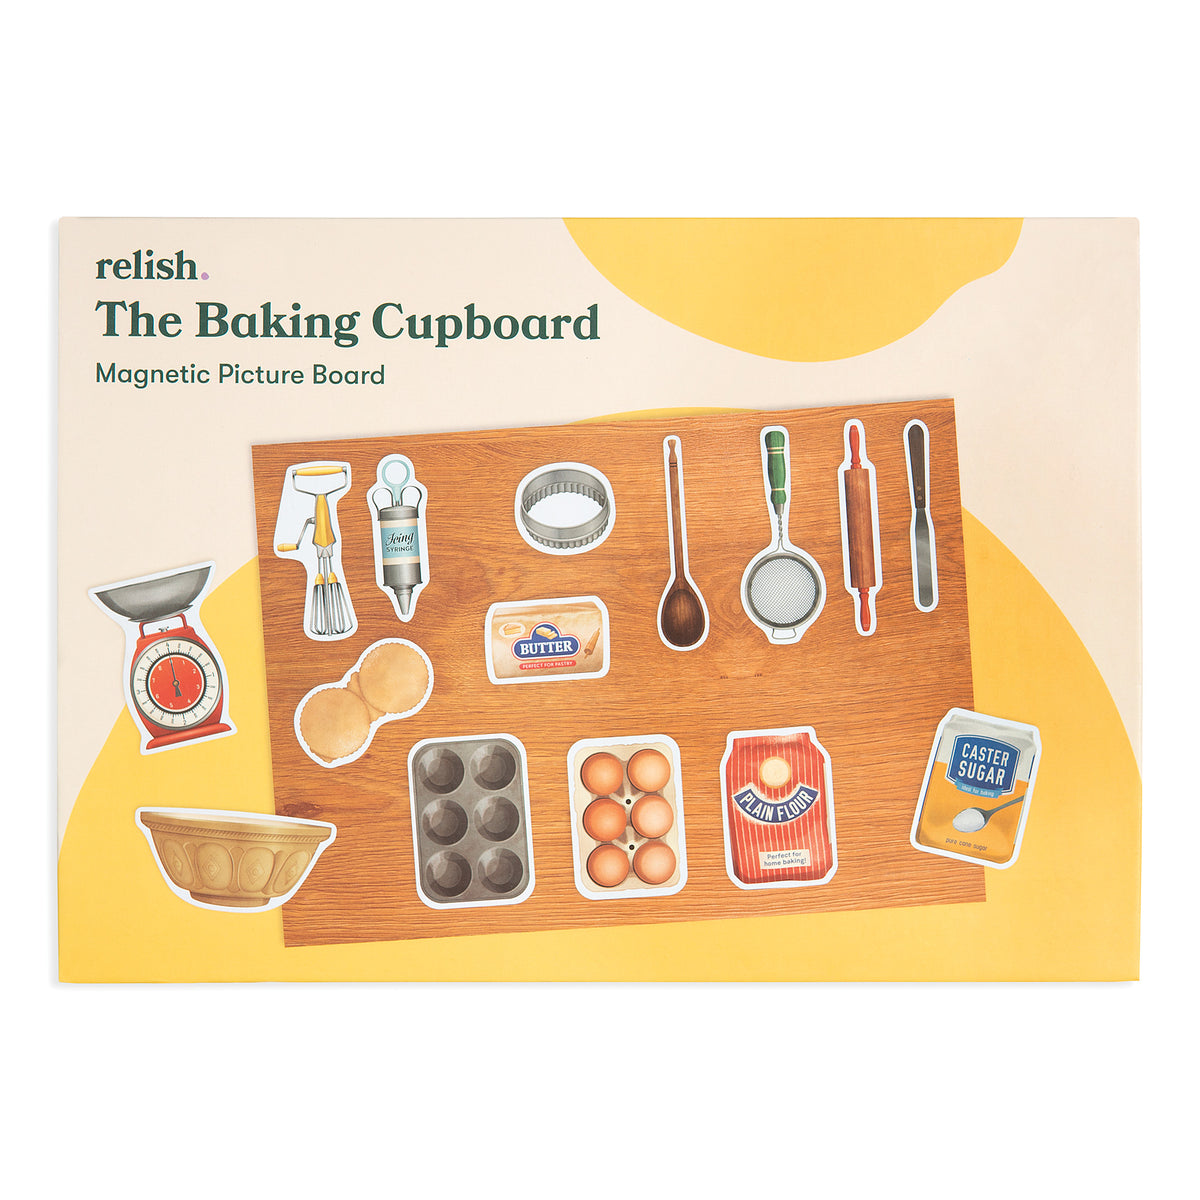 The Baking Cupboard reminiscence